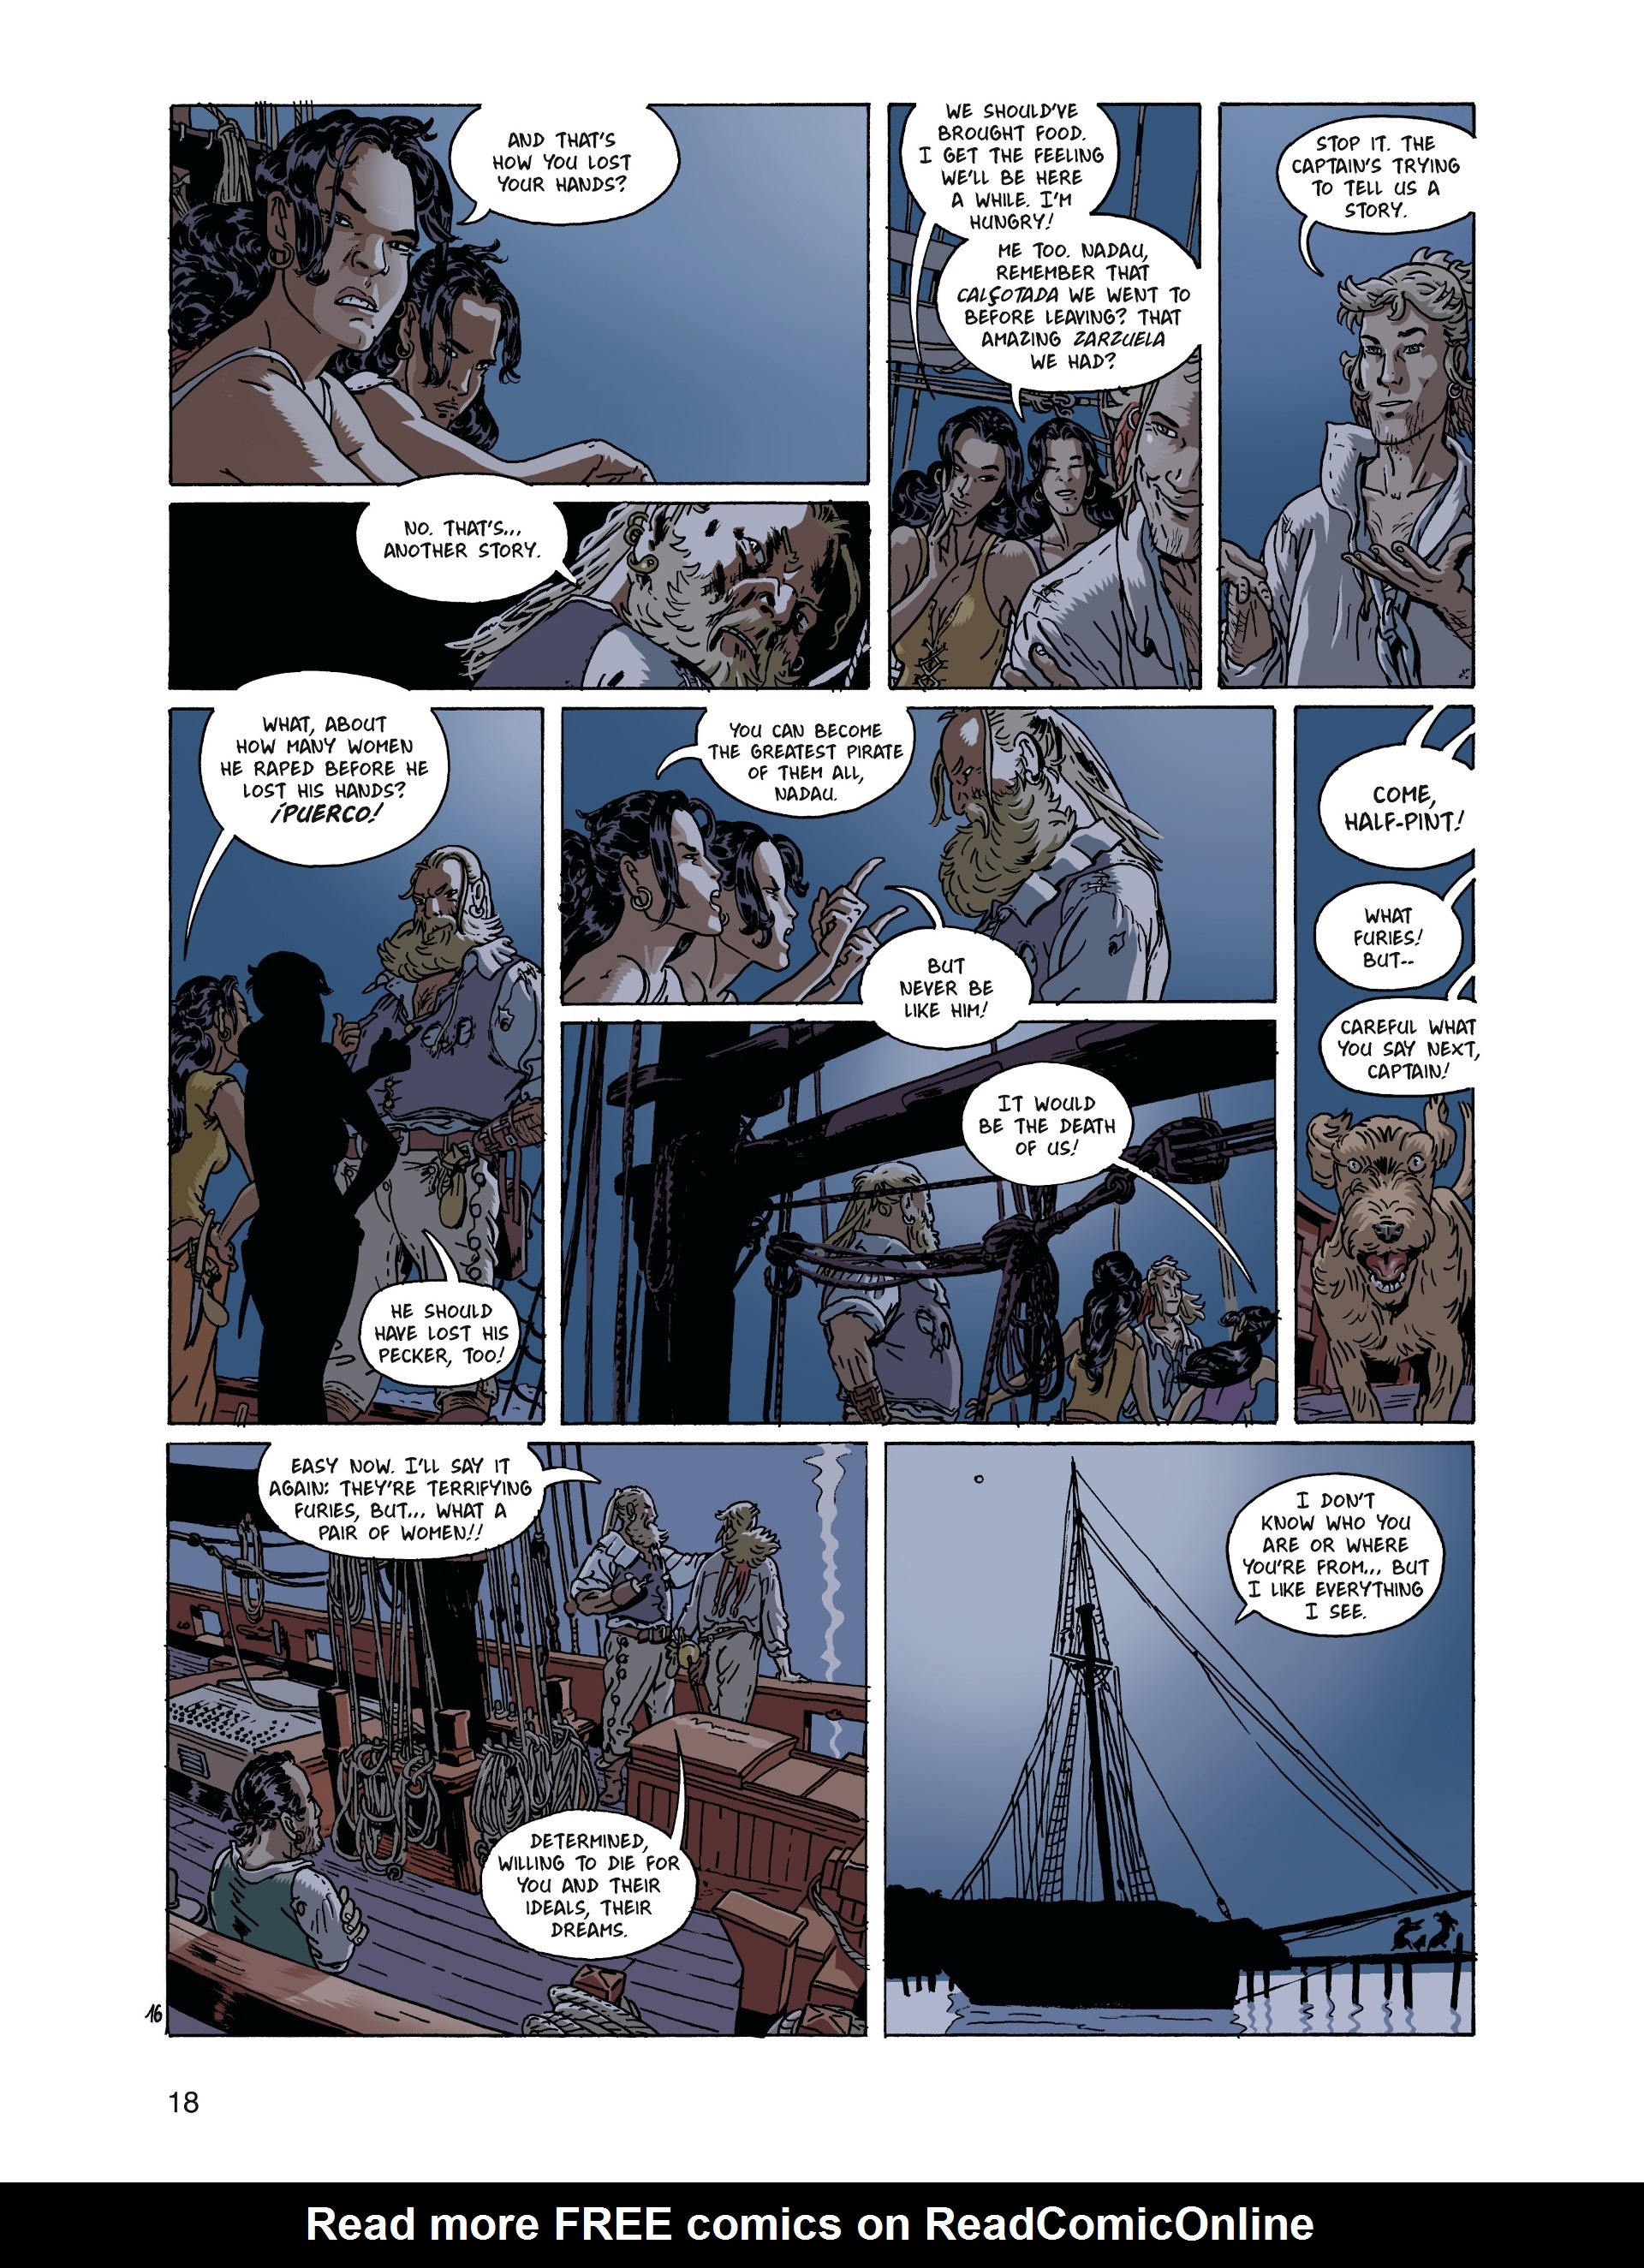 Read online Gypsies of the High Seas comic -  Issue # TPB 2 - 18